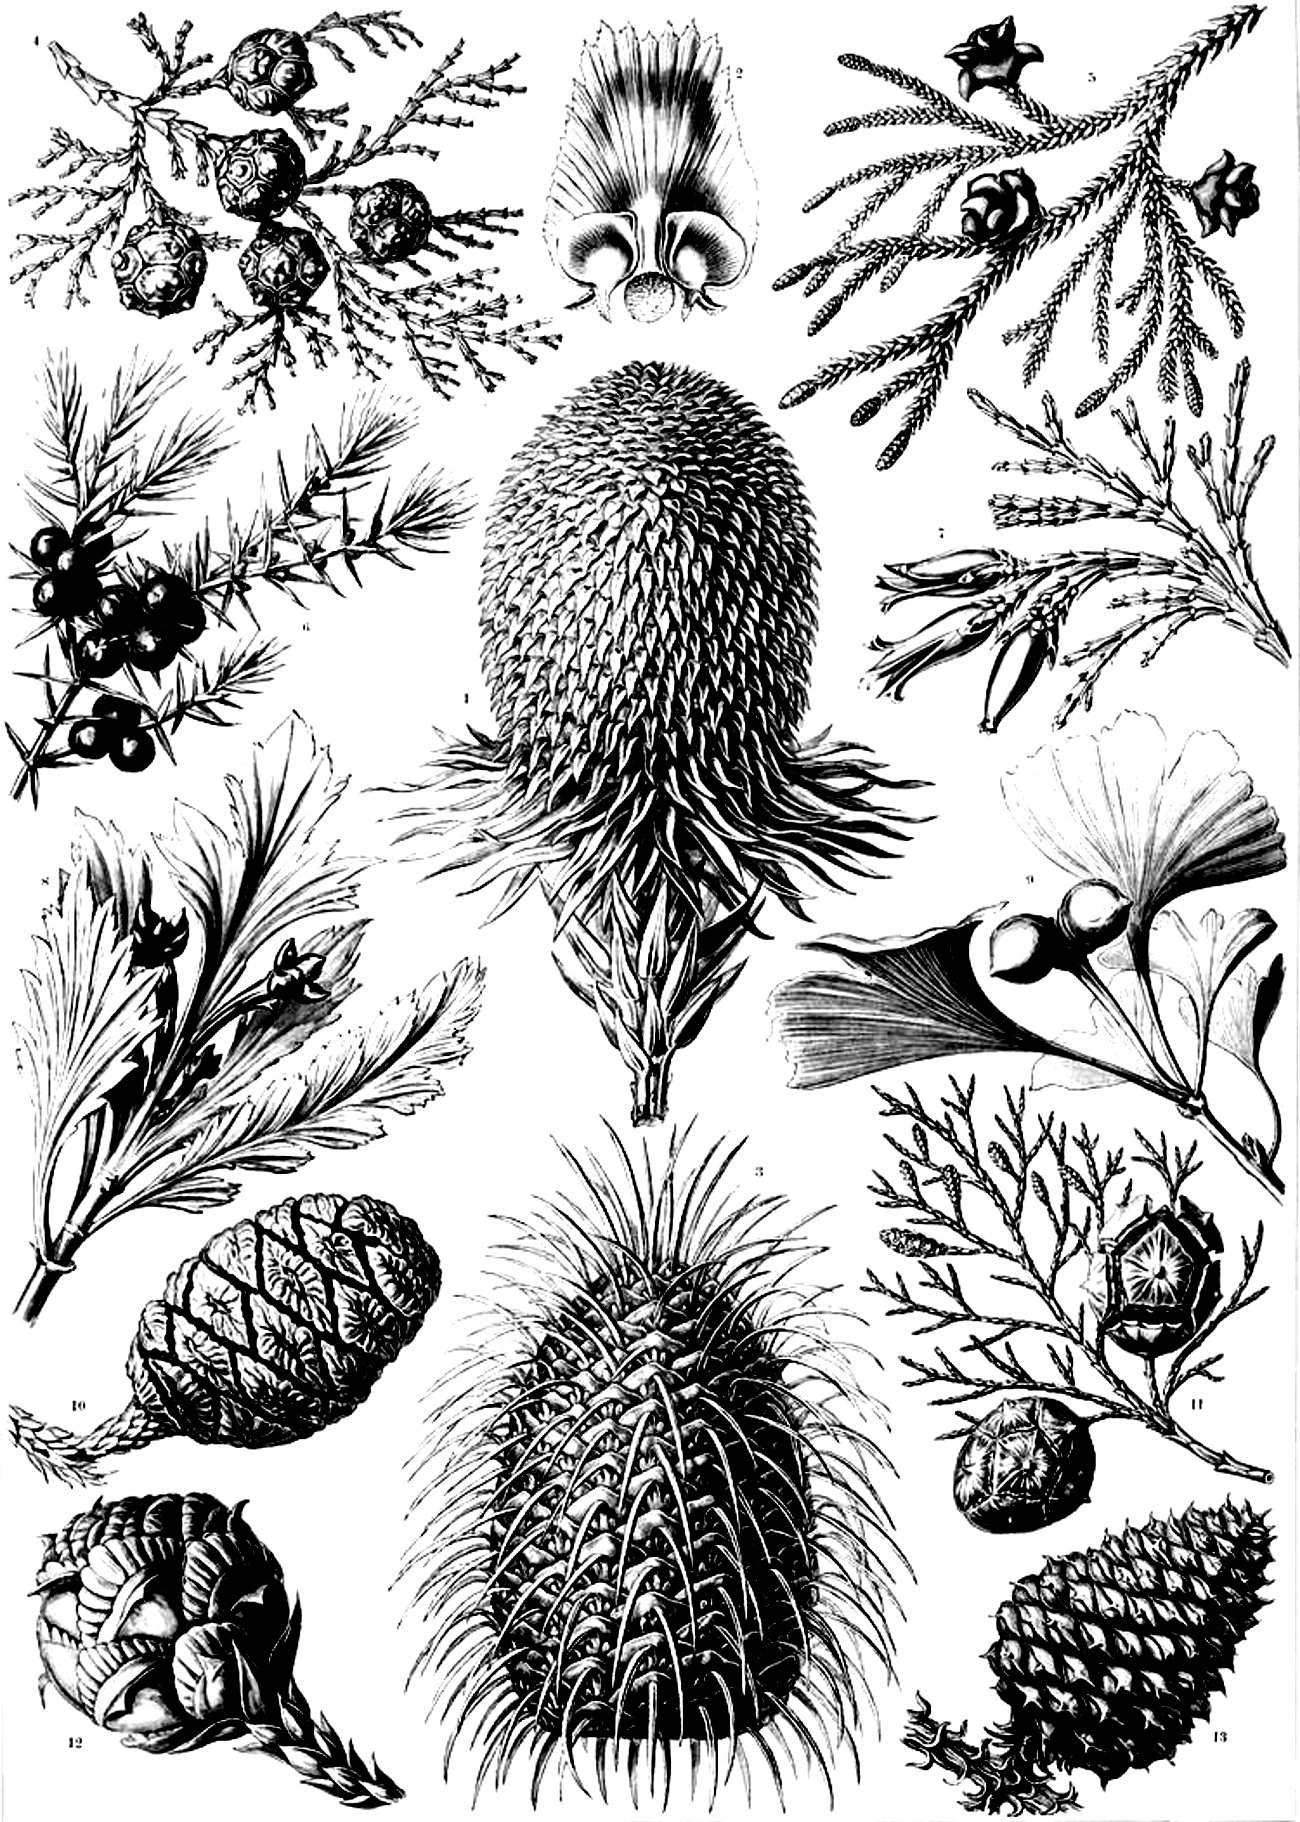 Old engraving flowers vegetation - Image with : Plant